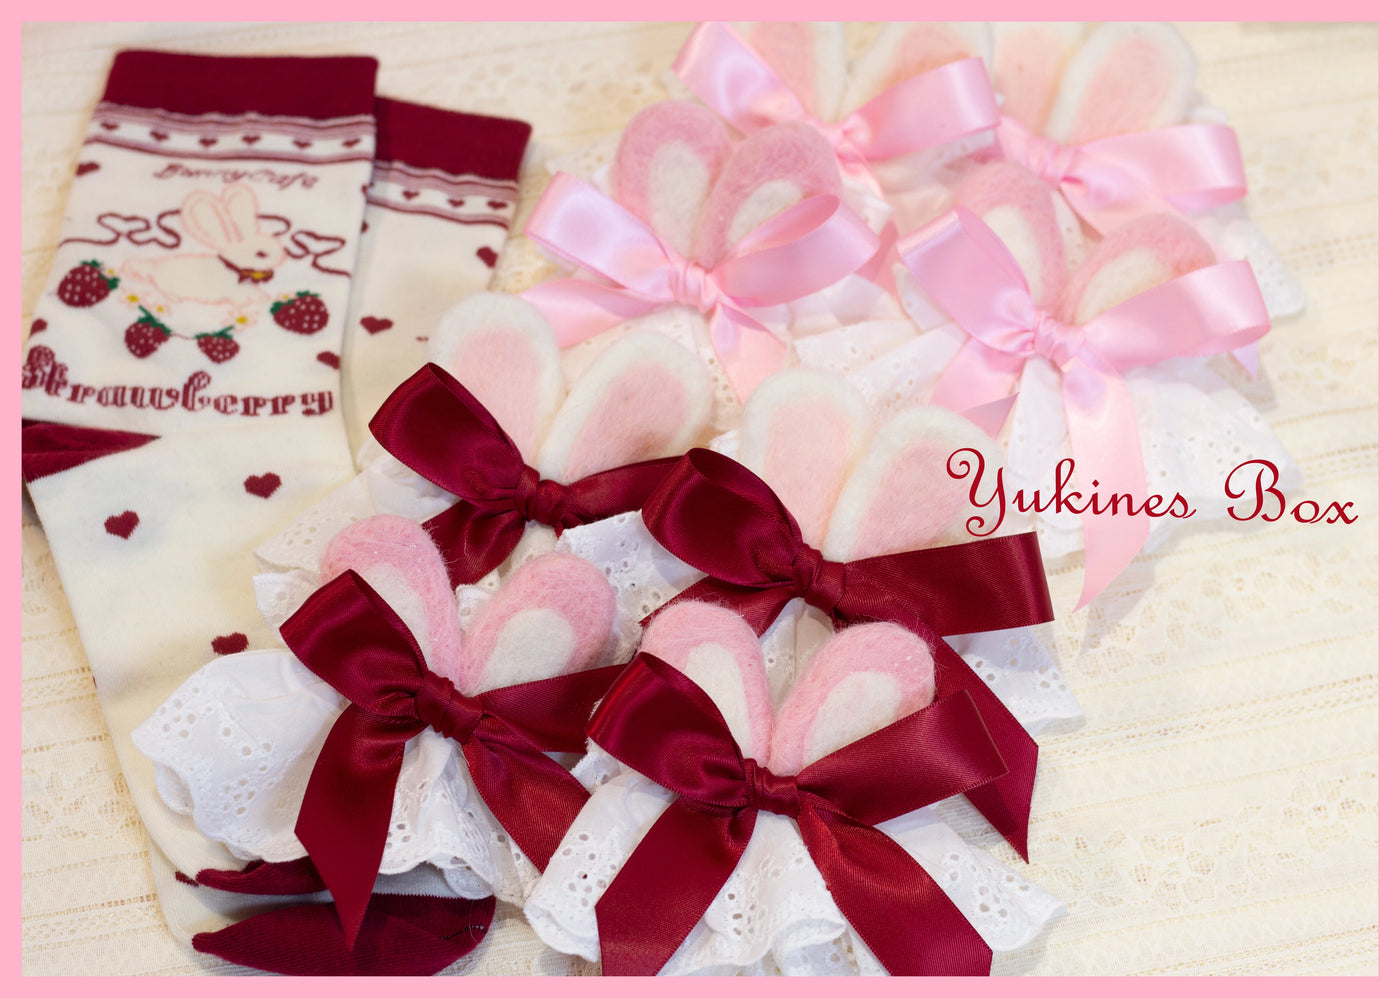 Yukines Box~Kawaii Lolita Rabbit Ear Cuffs and Ankle Lace a pair of cuffs pink rabbit ears with pink bow 